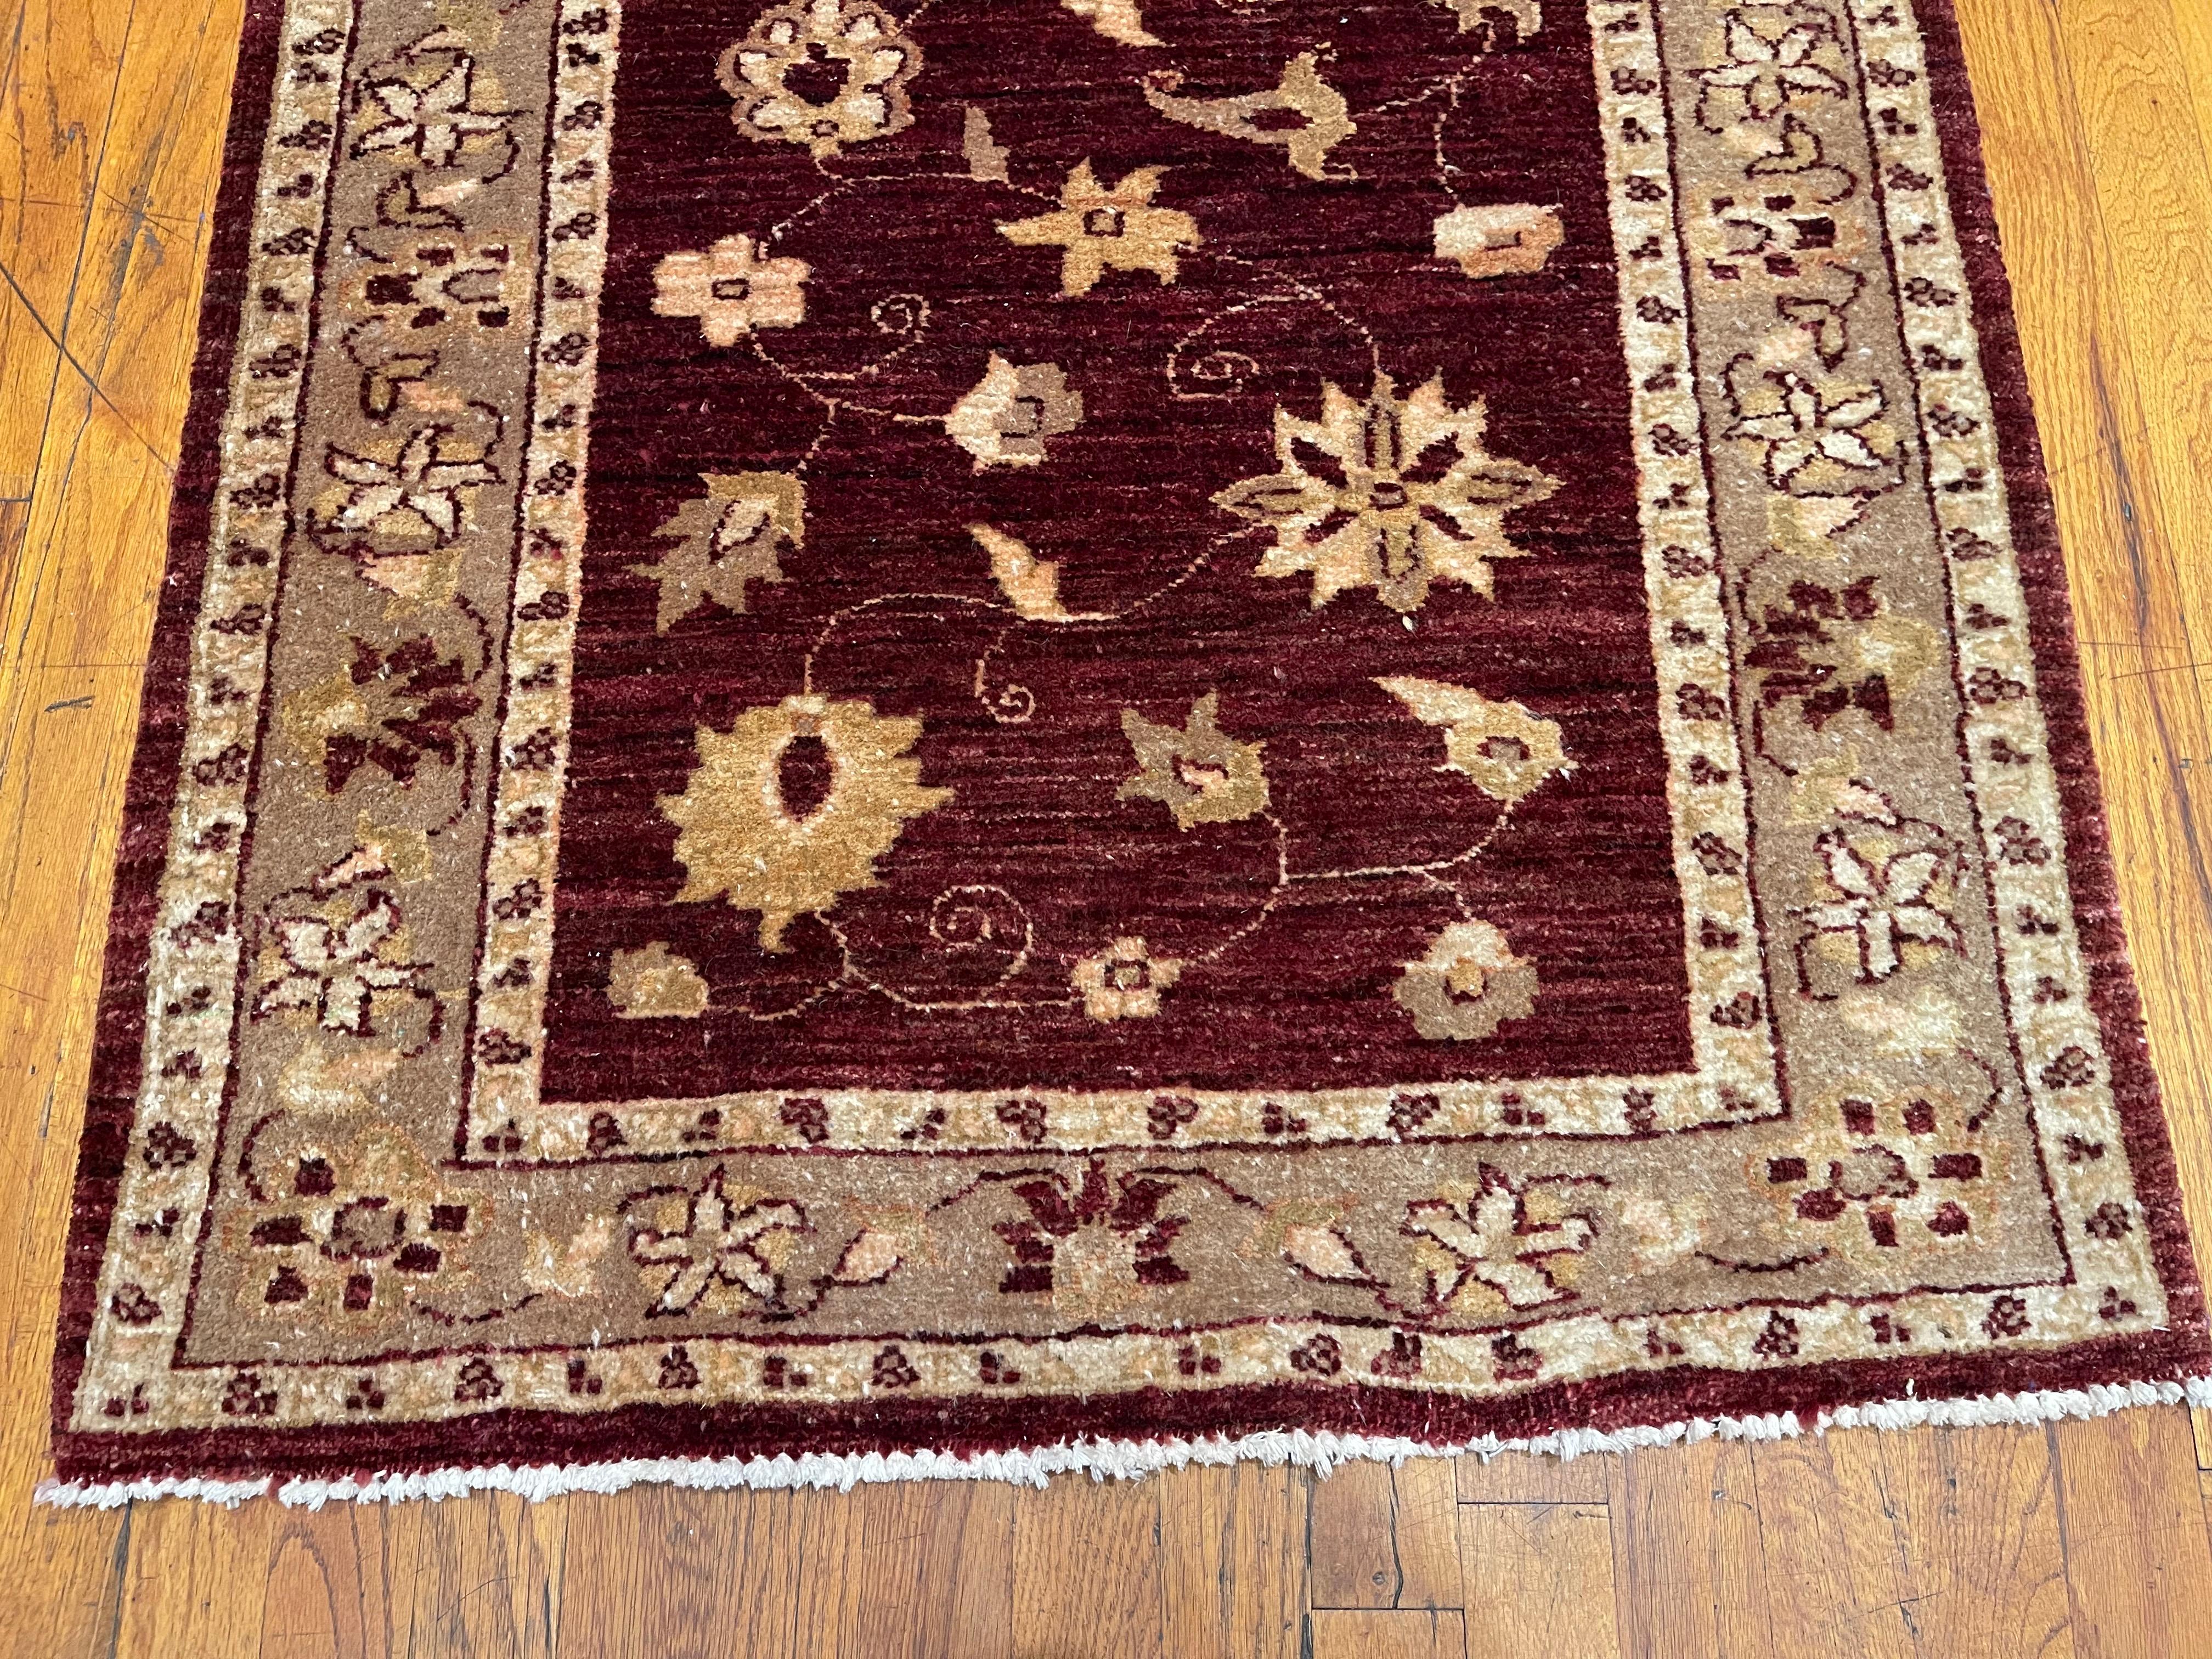 
This Pakistan rug is a hand knotted with a wool pile and cotton weft. The base color is rich burgundy and the border is beige. The Pakistan rugs are in high demand across the market because their design, quality and color combination. Measuring 2